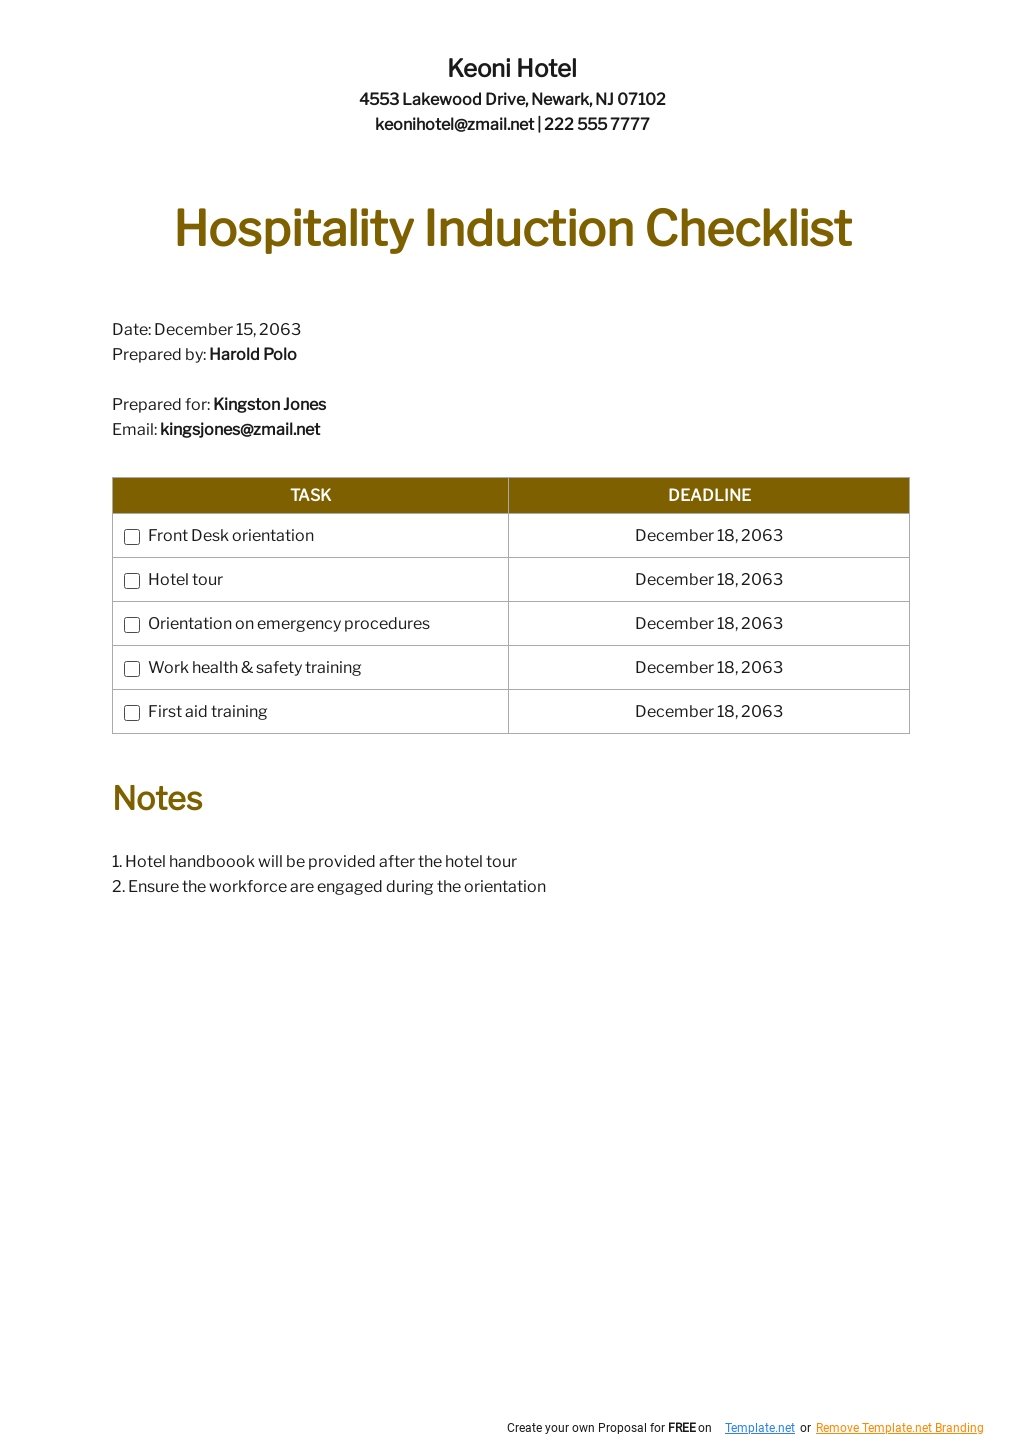 Hospitality Induction Checklist Template